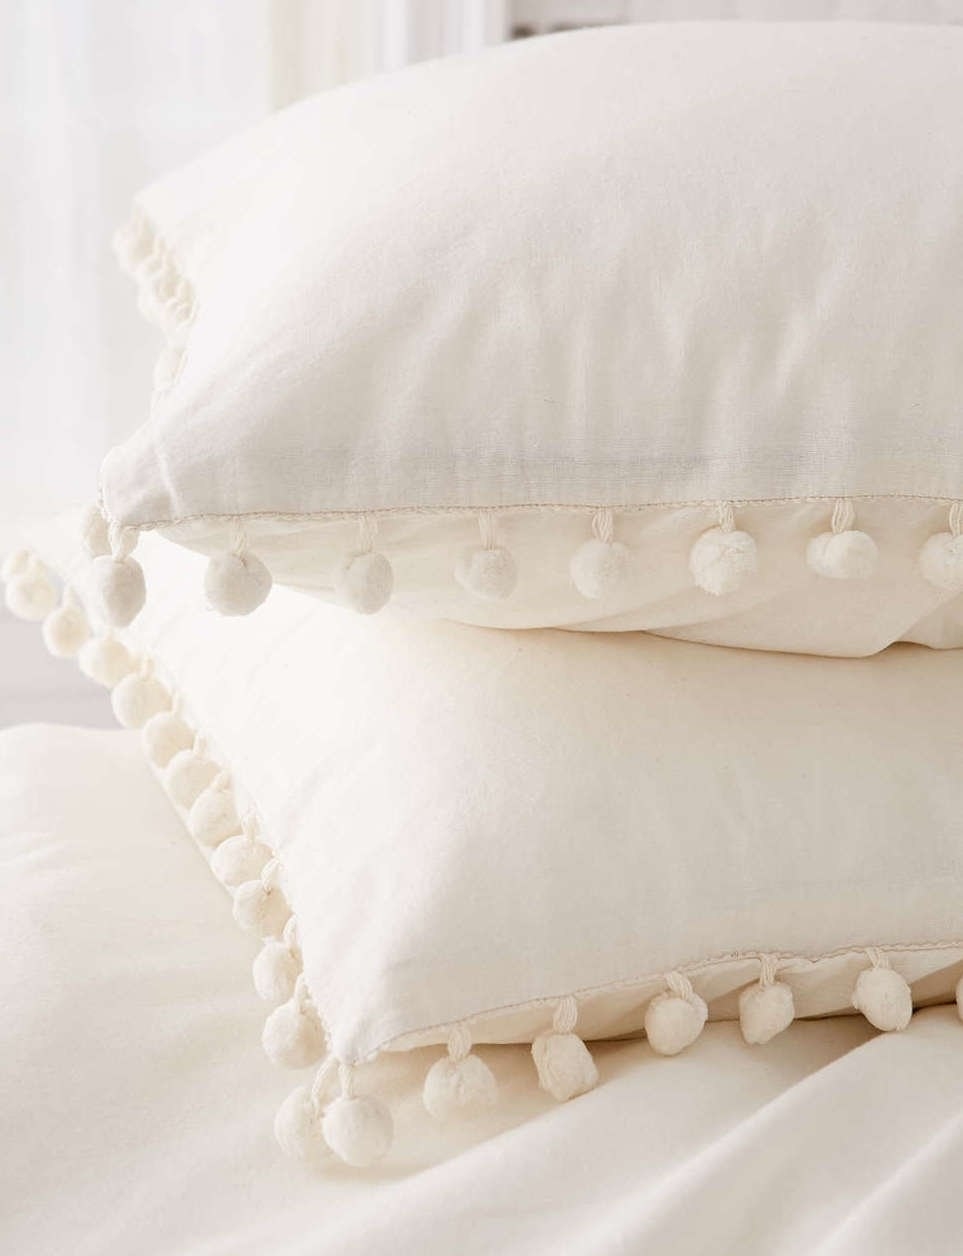 Two of the cotton shams on pillows stacked on top of each other